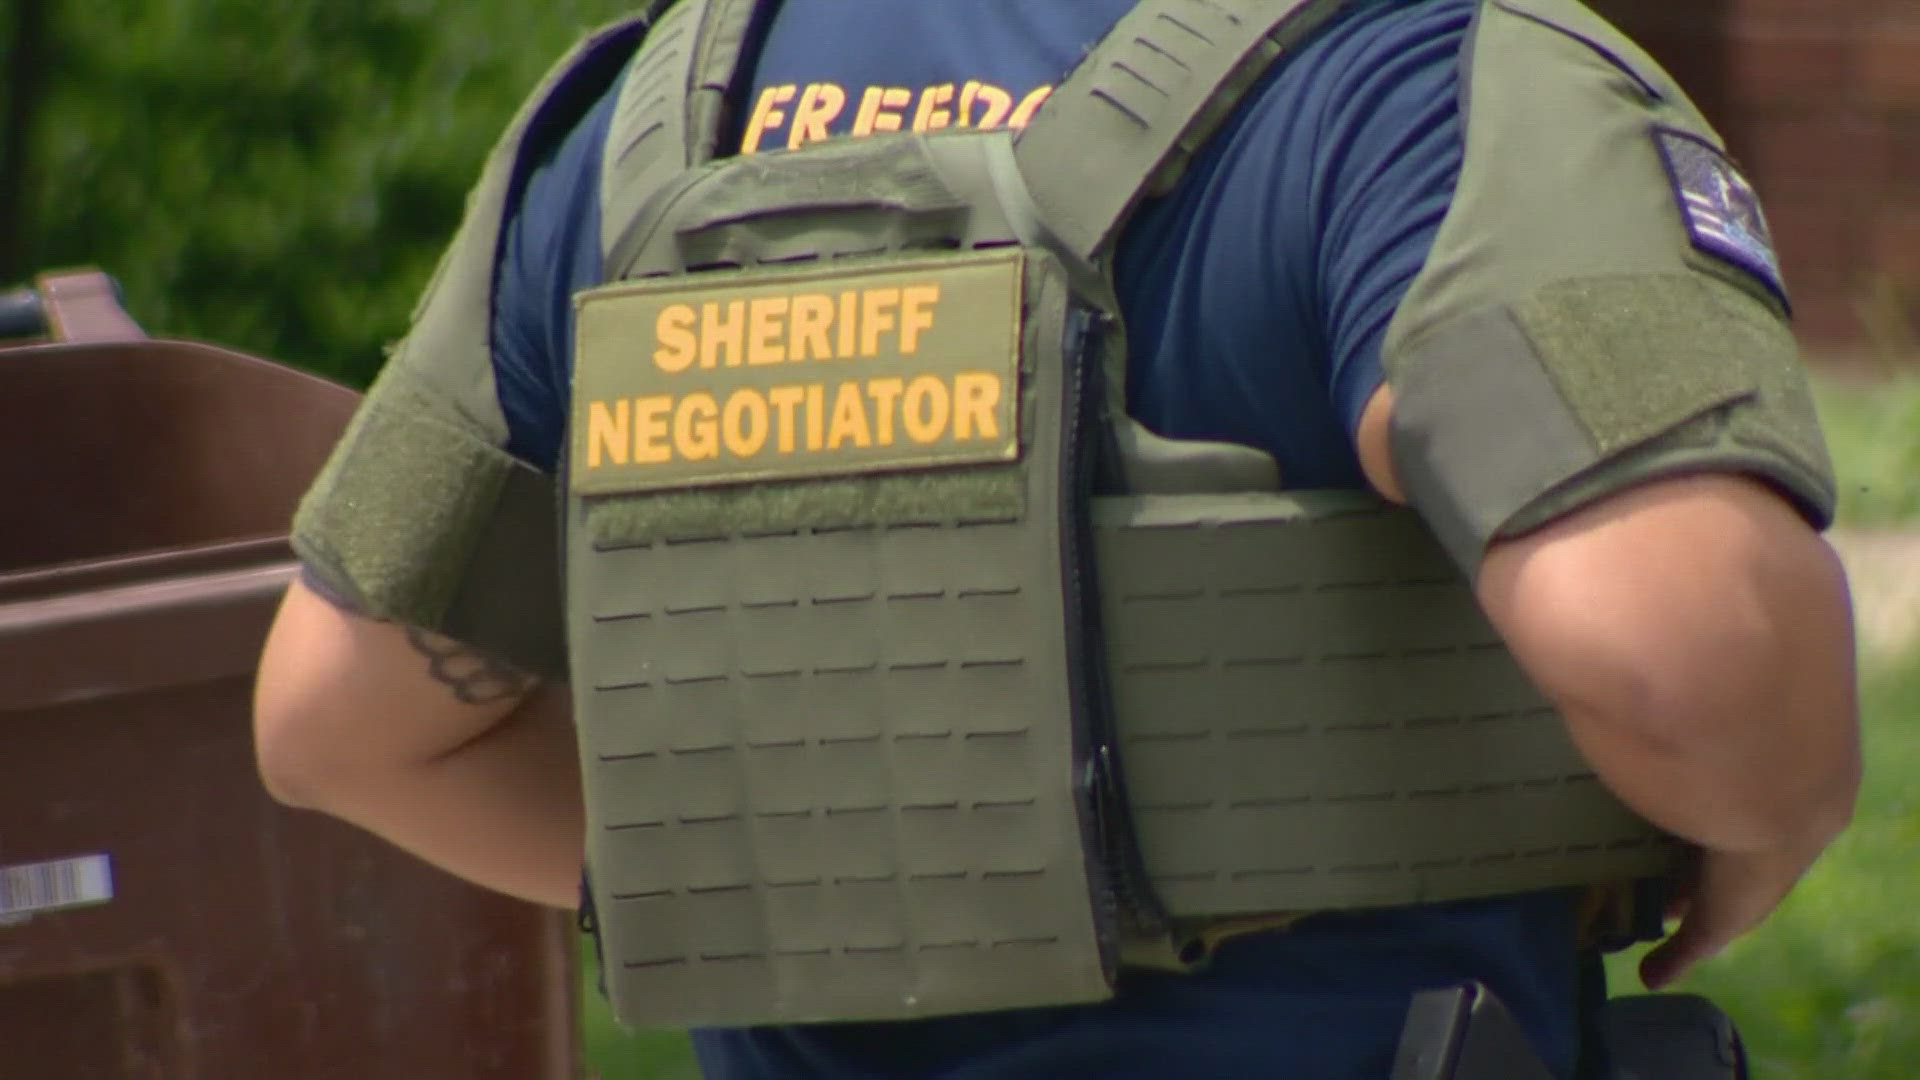 The man allegedly barricaded himself with a child inside a home on Saylers Creek.